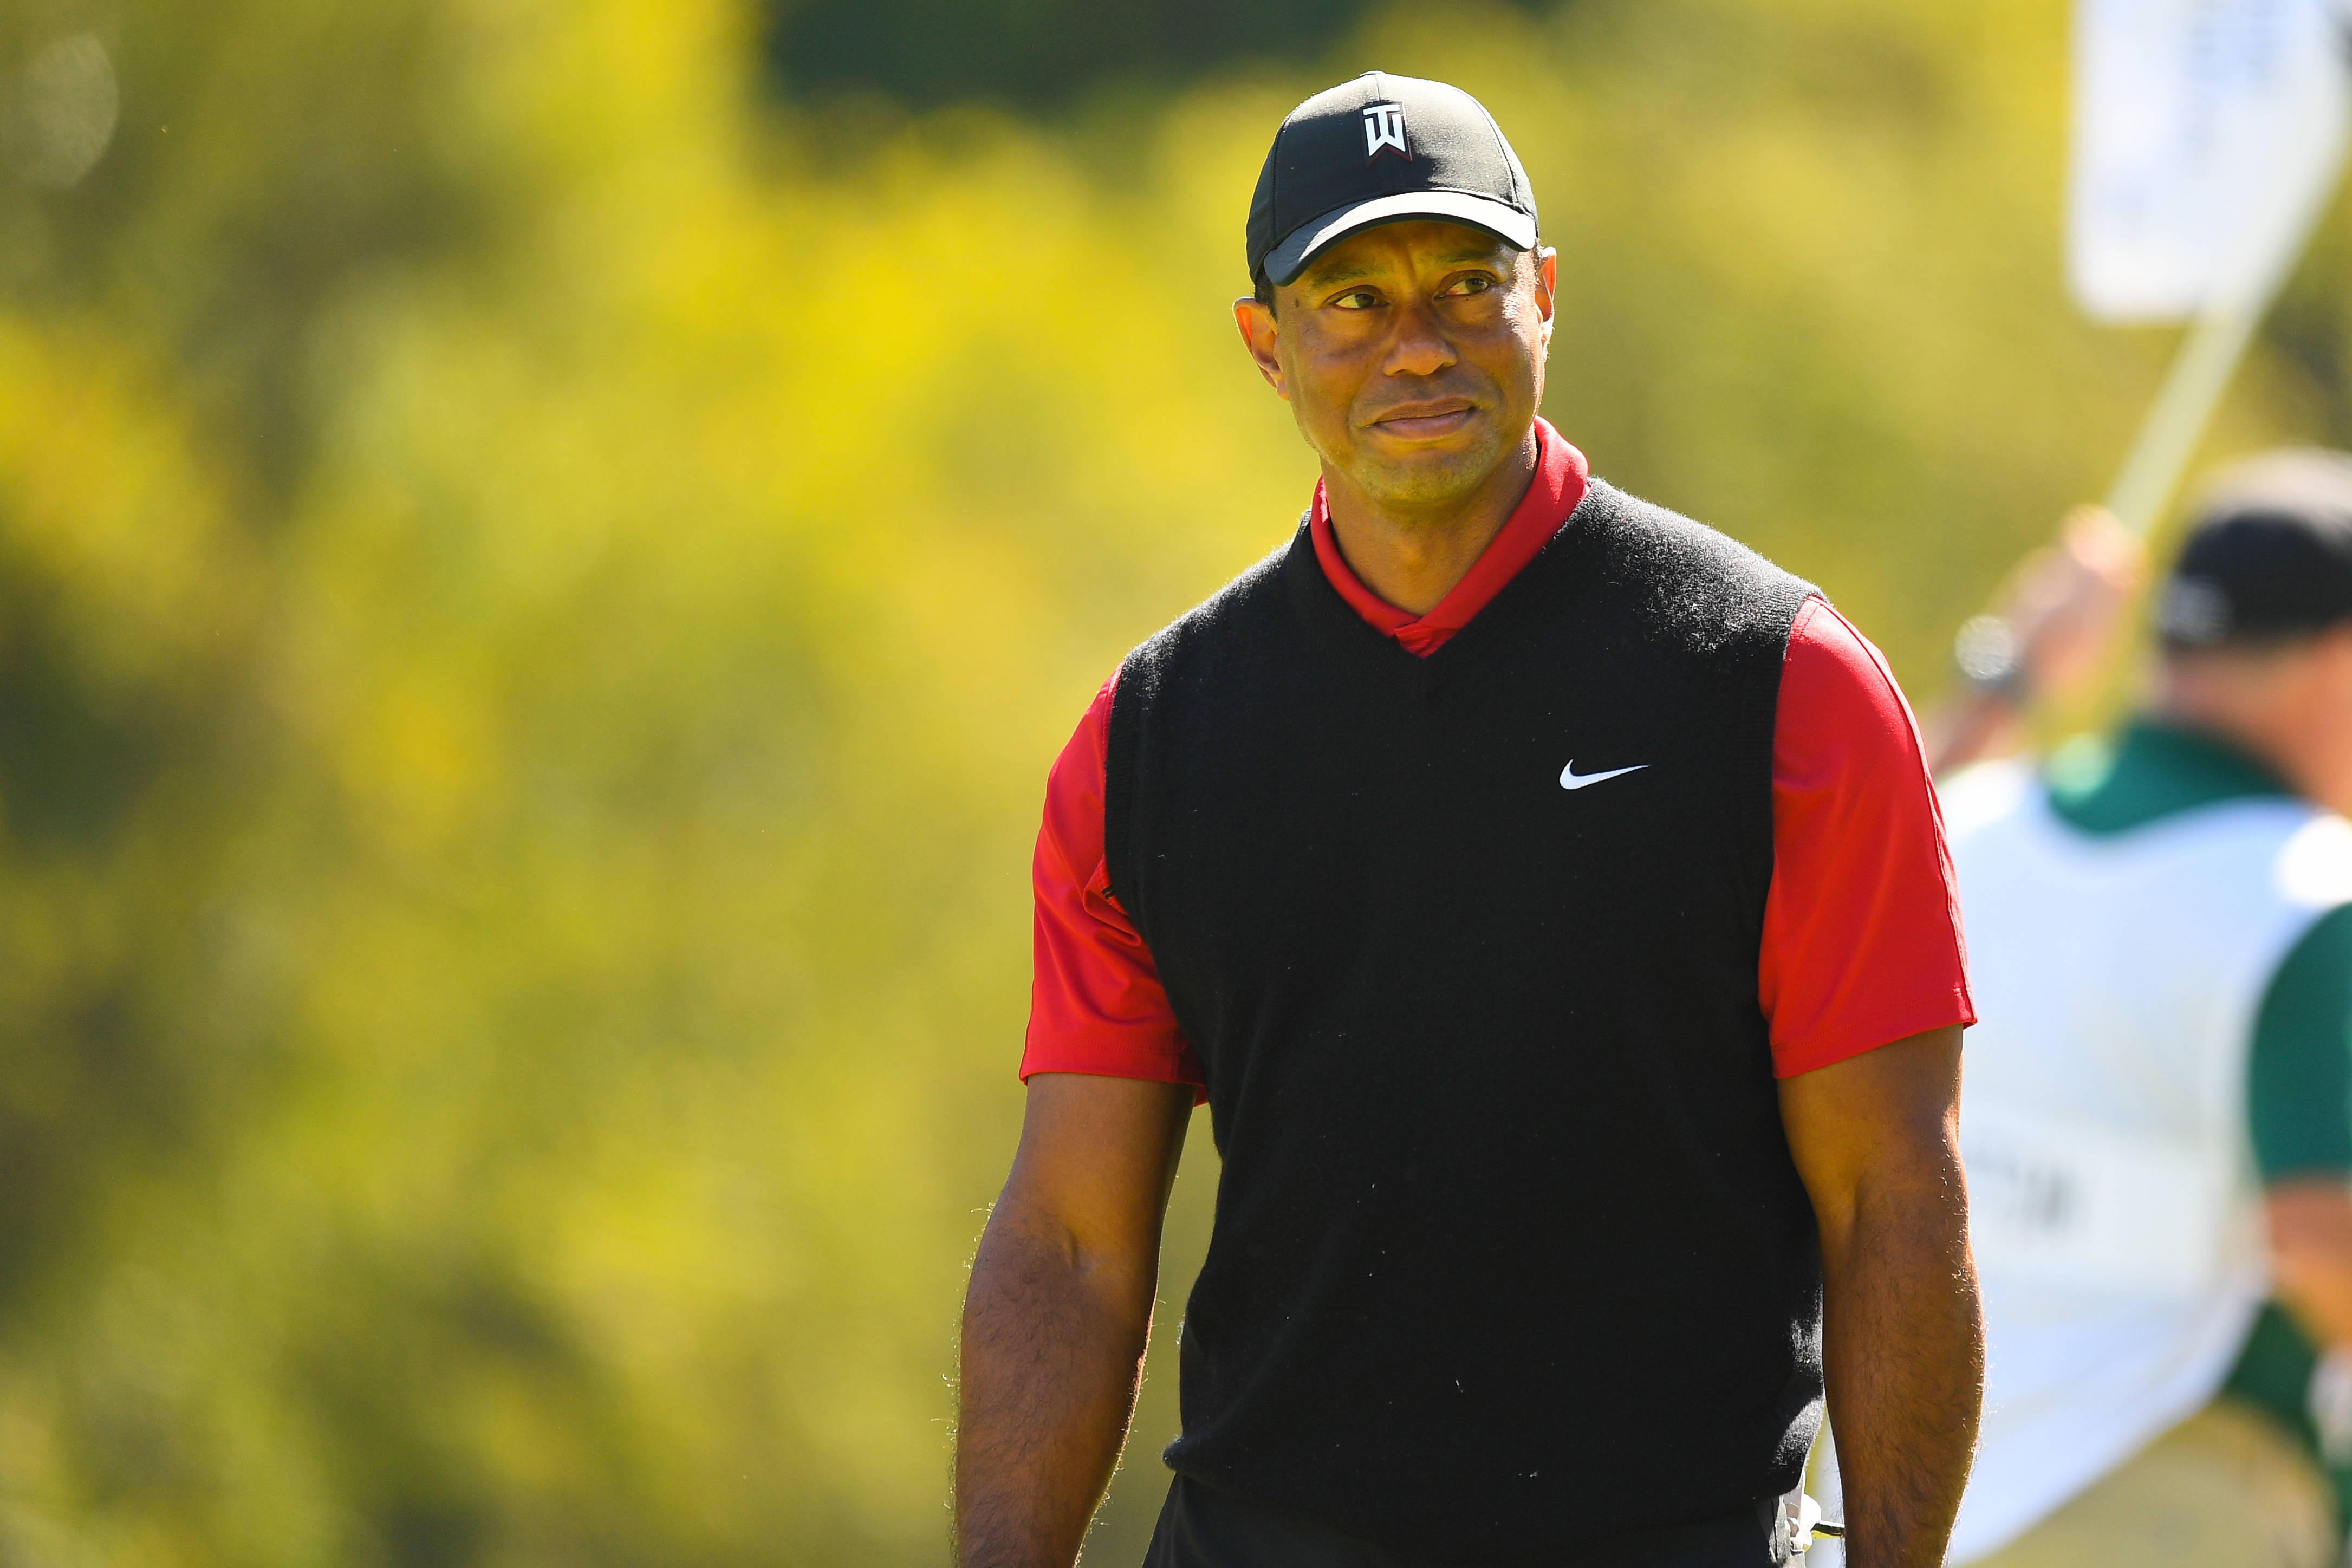 Tiger Woods looks on after a birdie on the 13th hole during the final round of the Genesis Invitational on February 19, 2023, at Riviera Country Club in Pacific Palisades, CA.